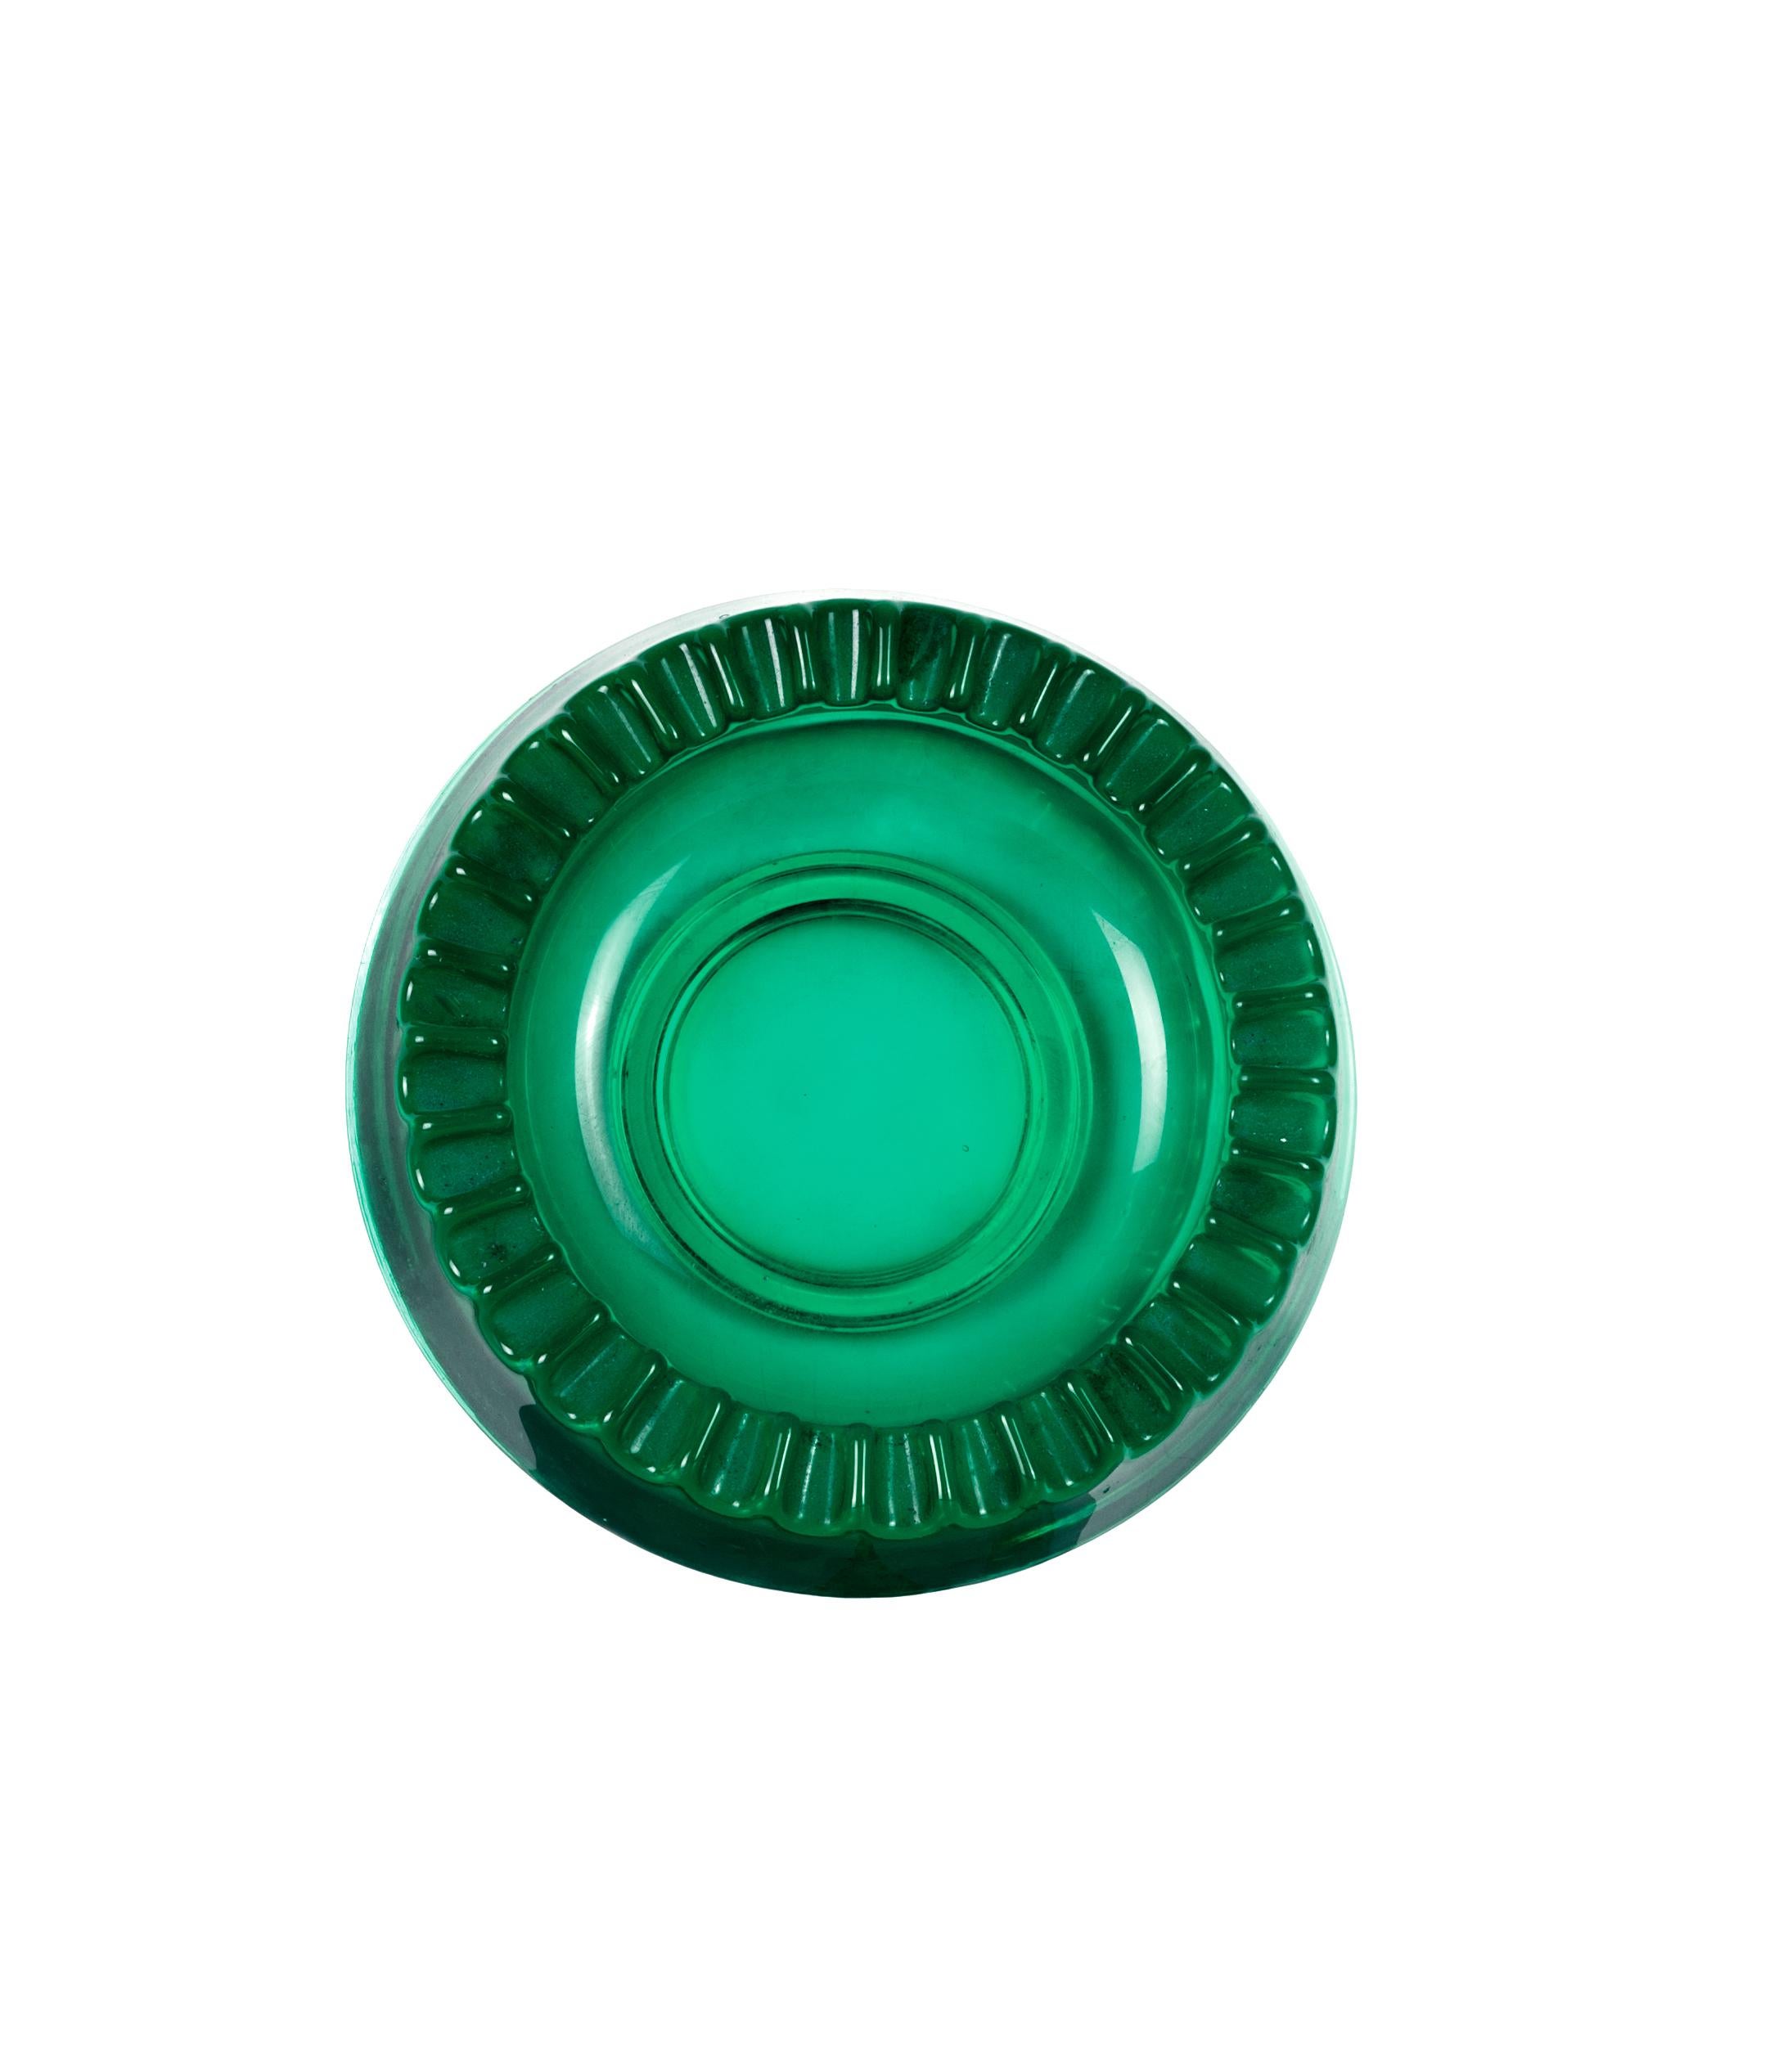 Late 20th Century Pair of Vintage Green Glass Ashtrays, Italy, 1970s